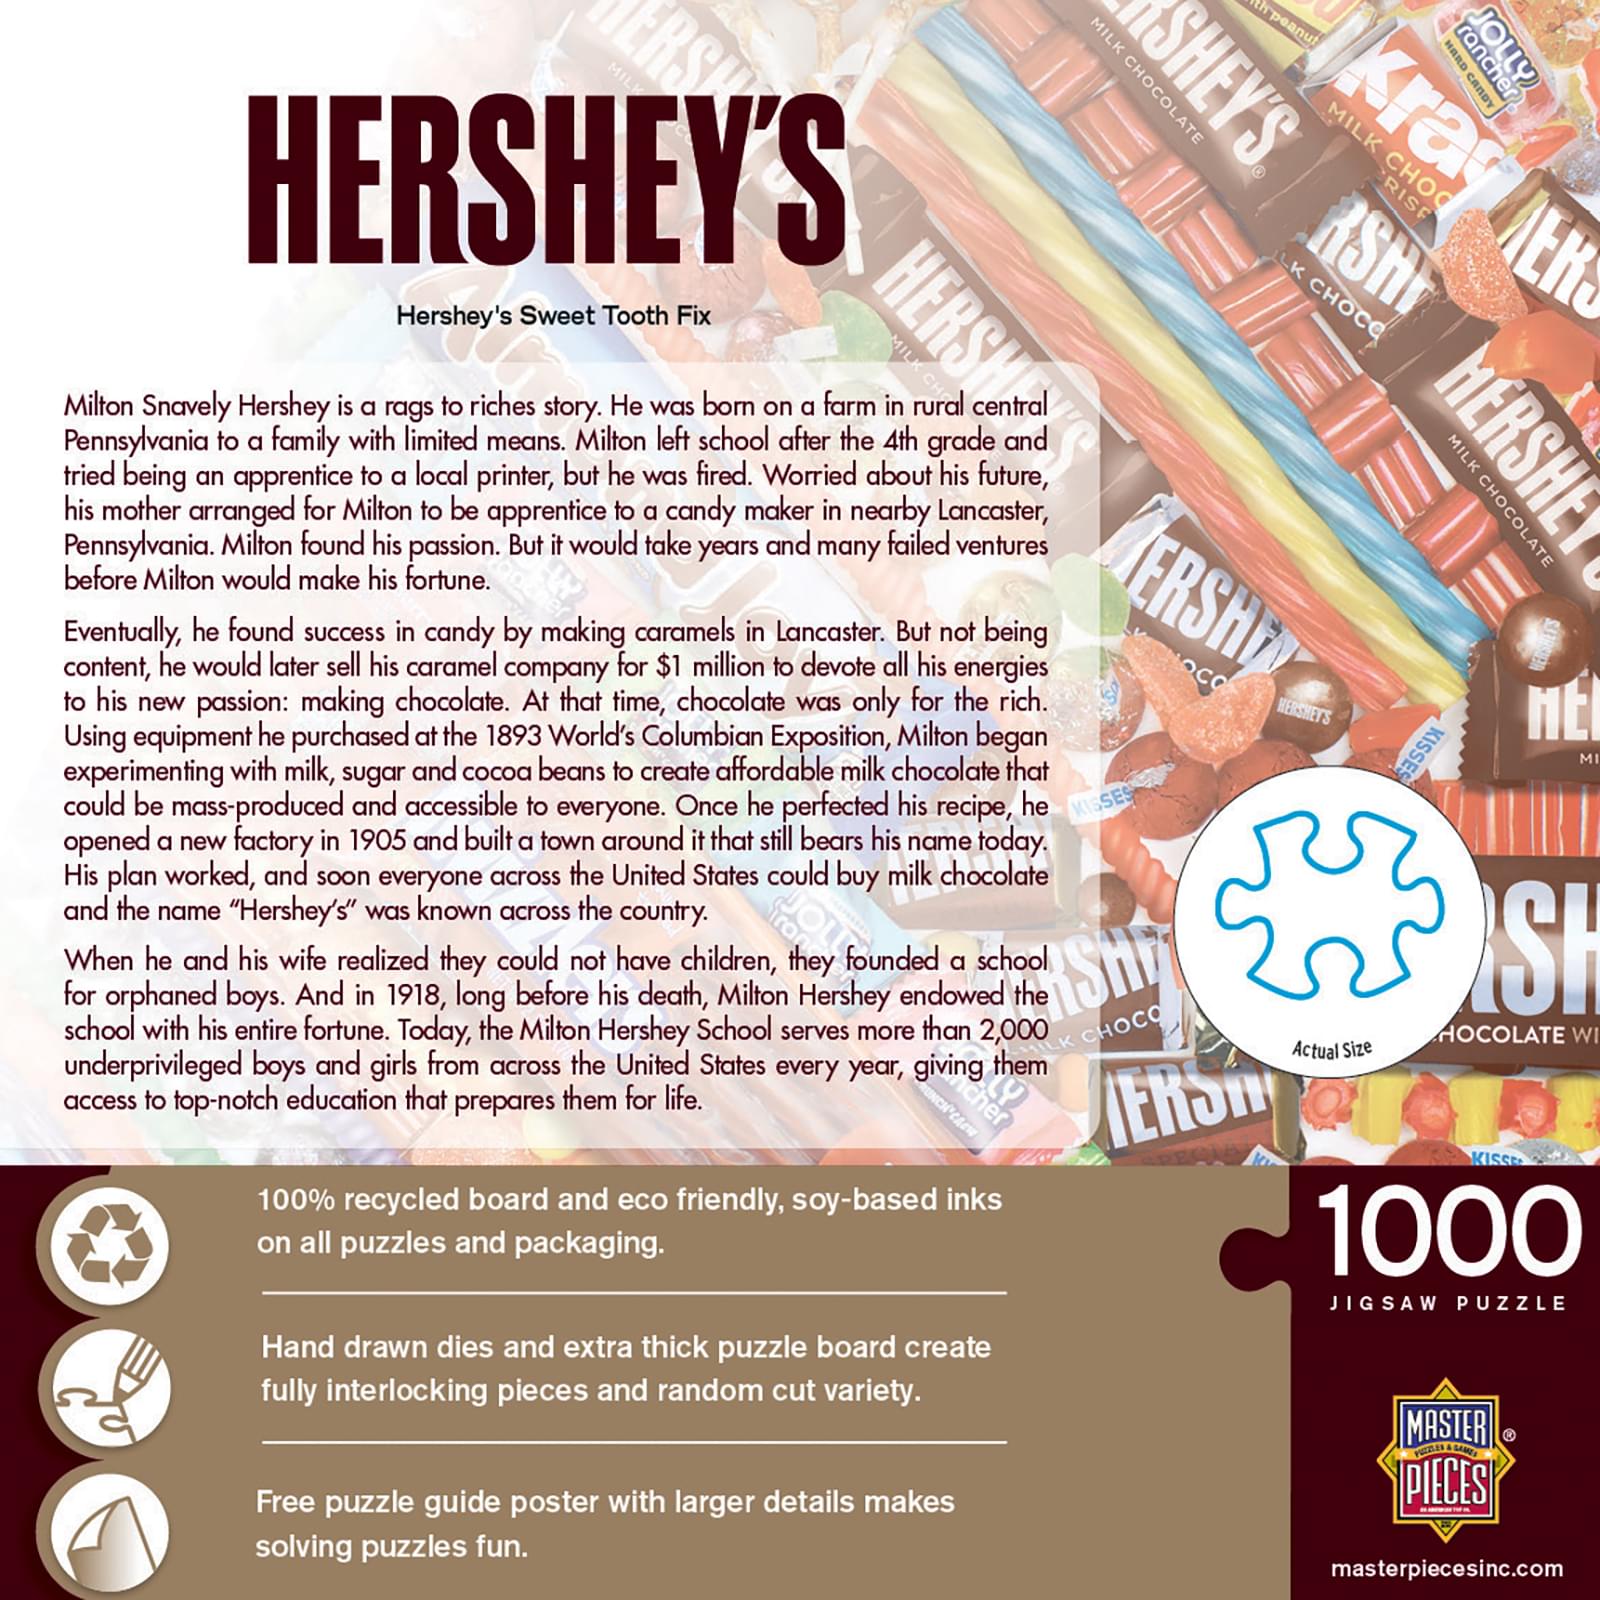 Hershey's Sweet Tooth Fix 1000 Piece Jigsaw Puzzle | Free Shipping ...